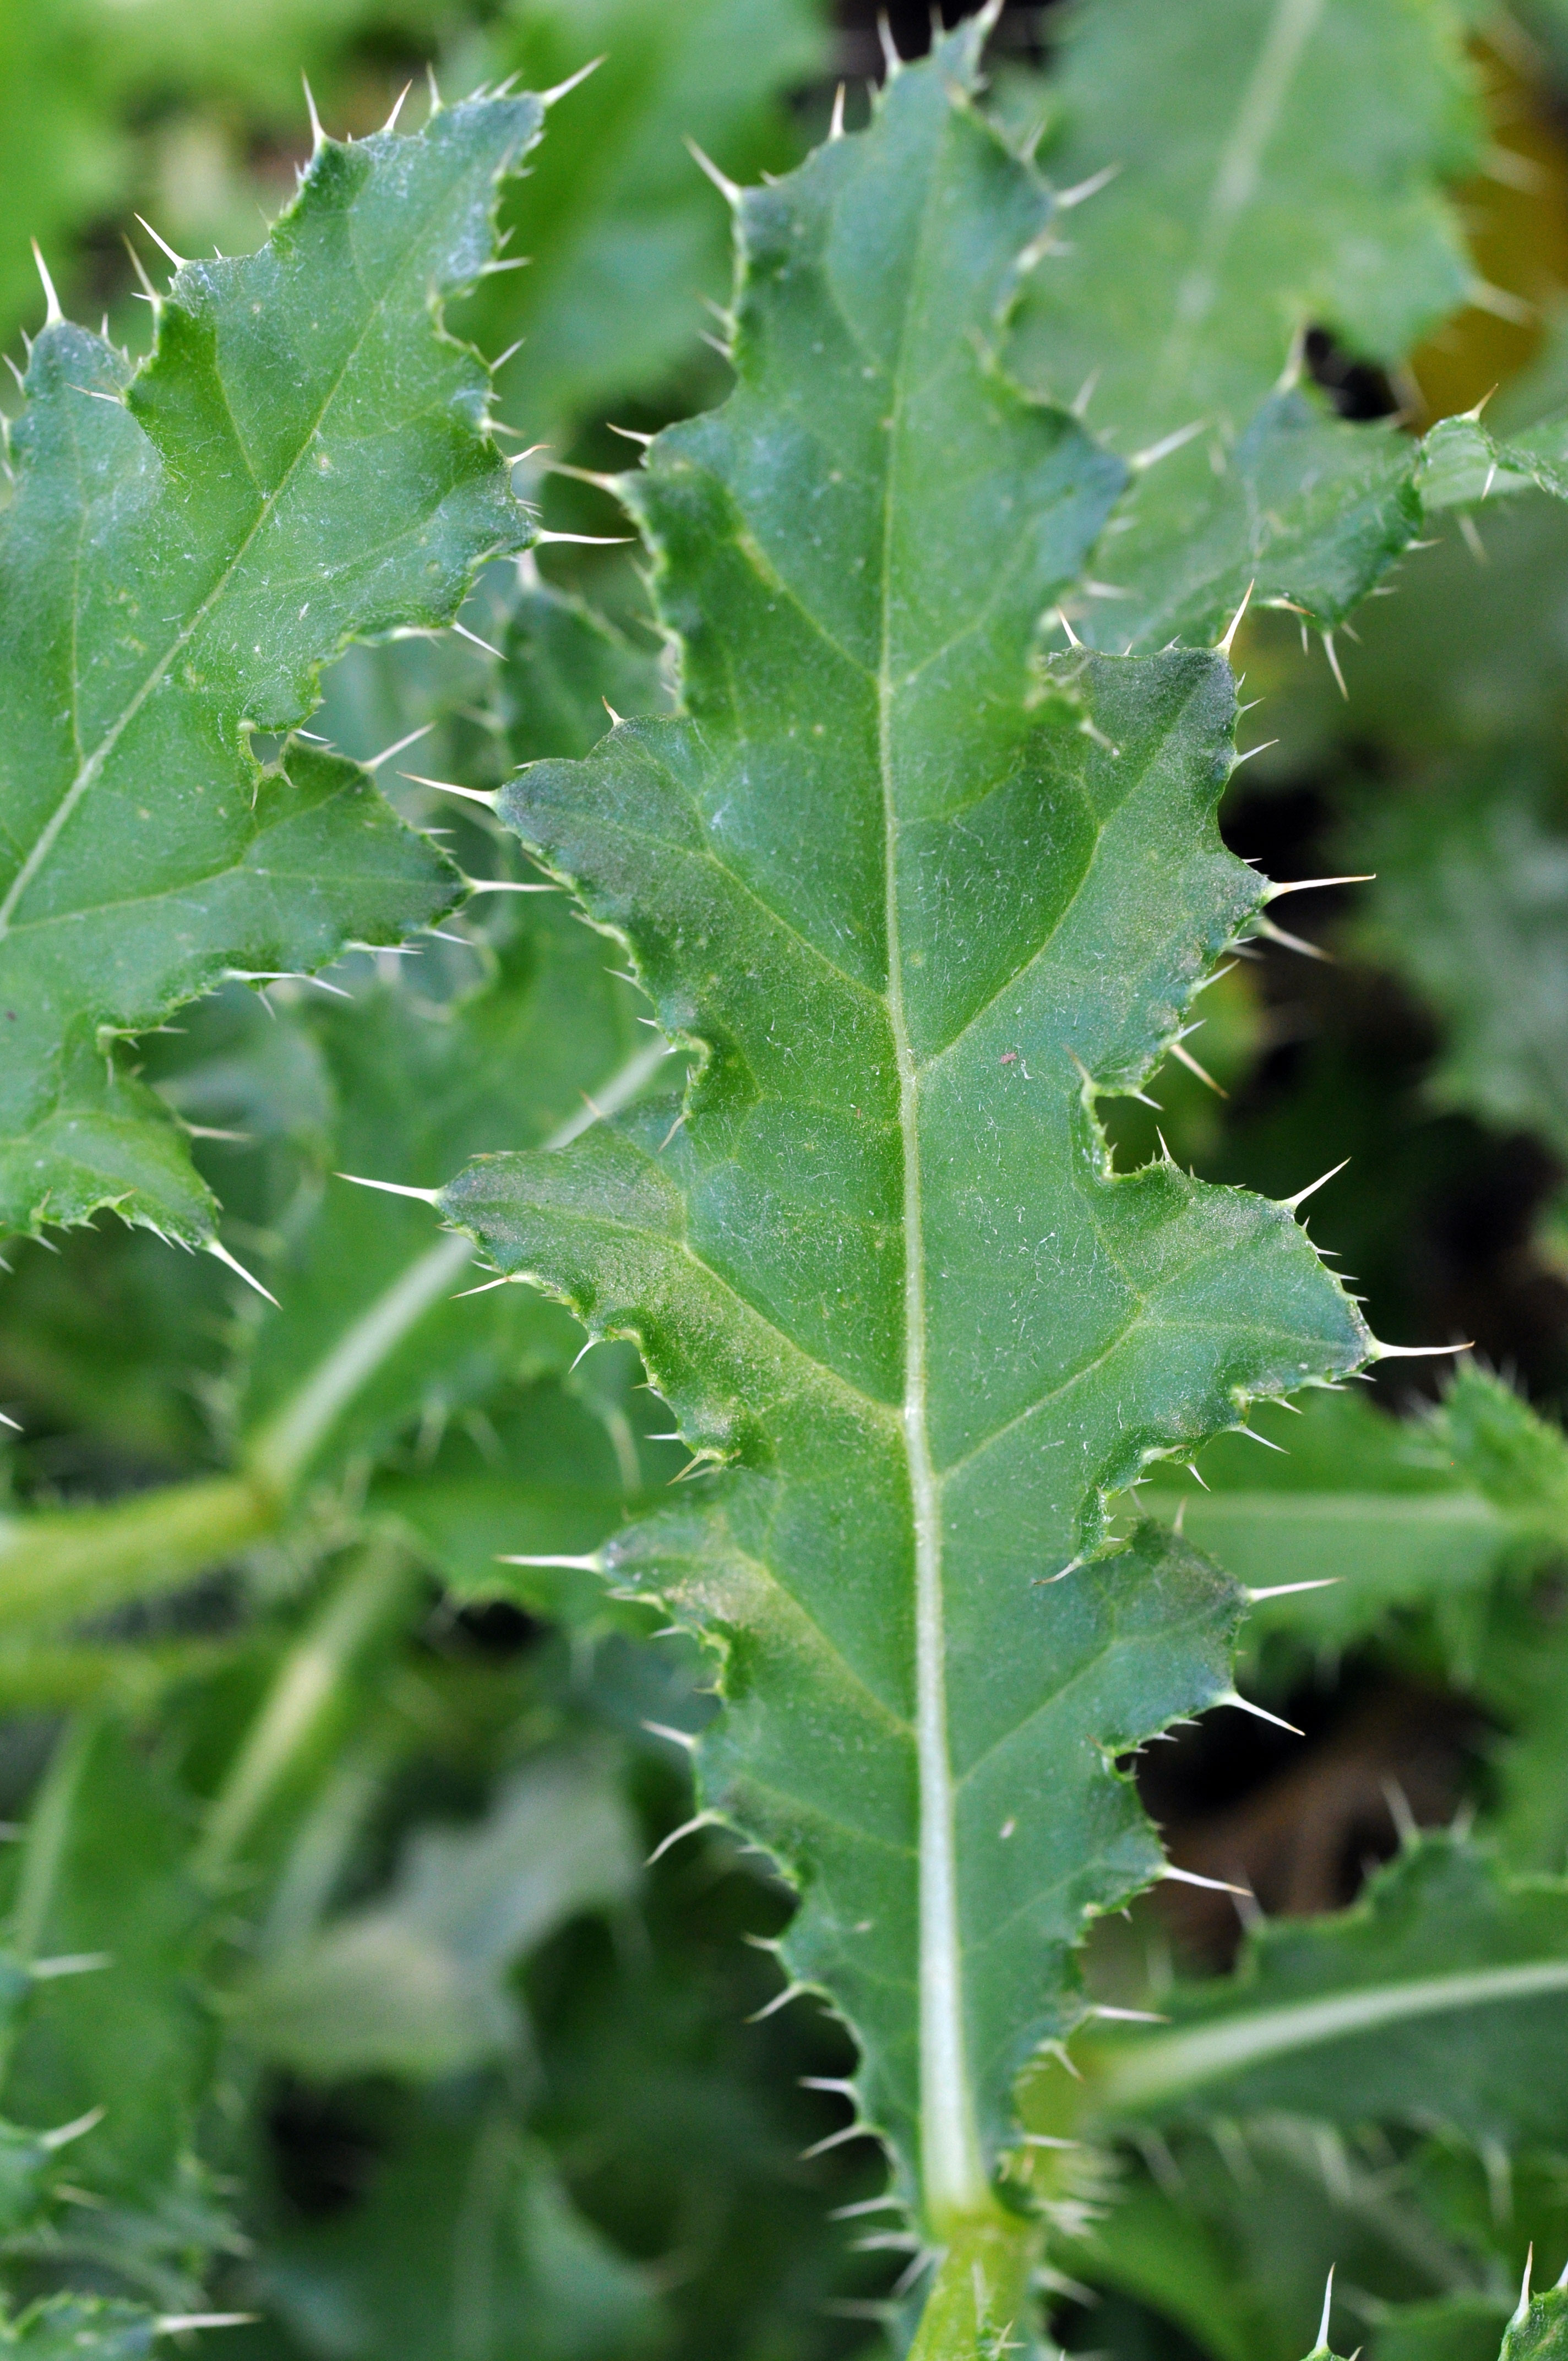 Canada thistle leaf upper surface